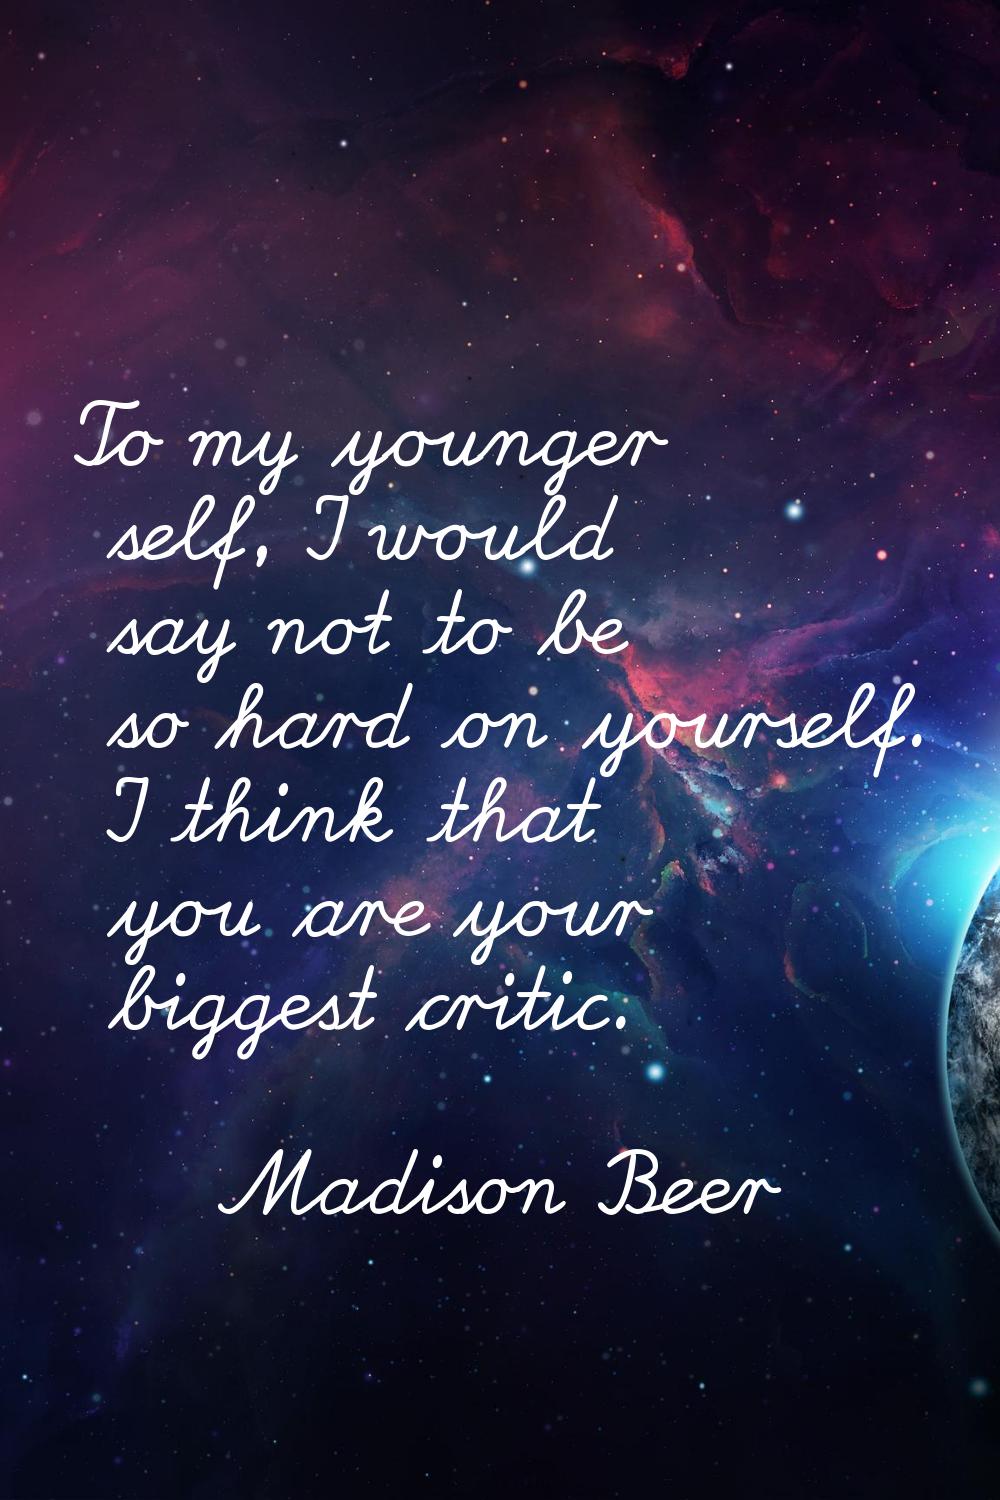 To my younger self, I would say not to be so hard on yourself. I think that you are your biggest cr